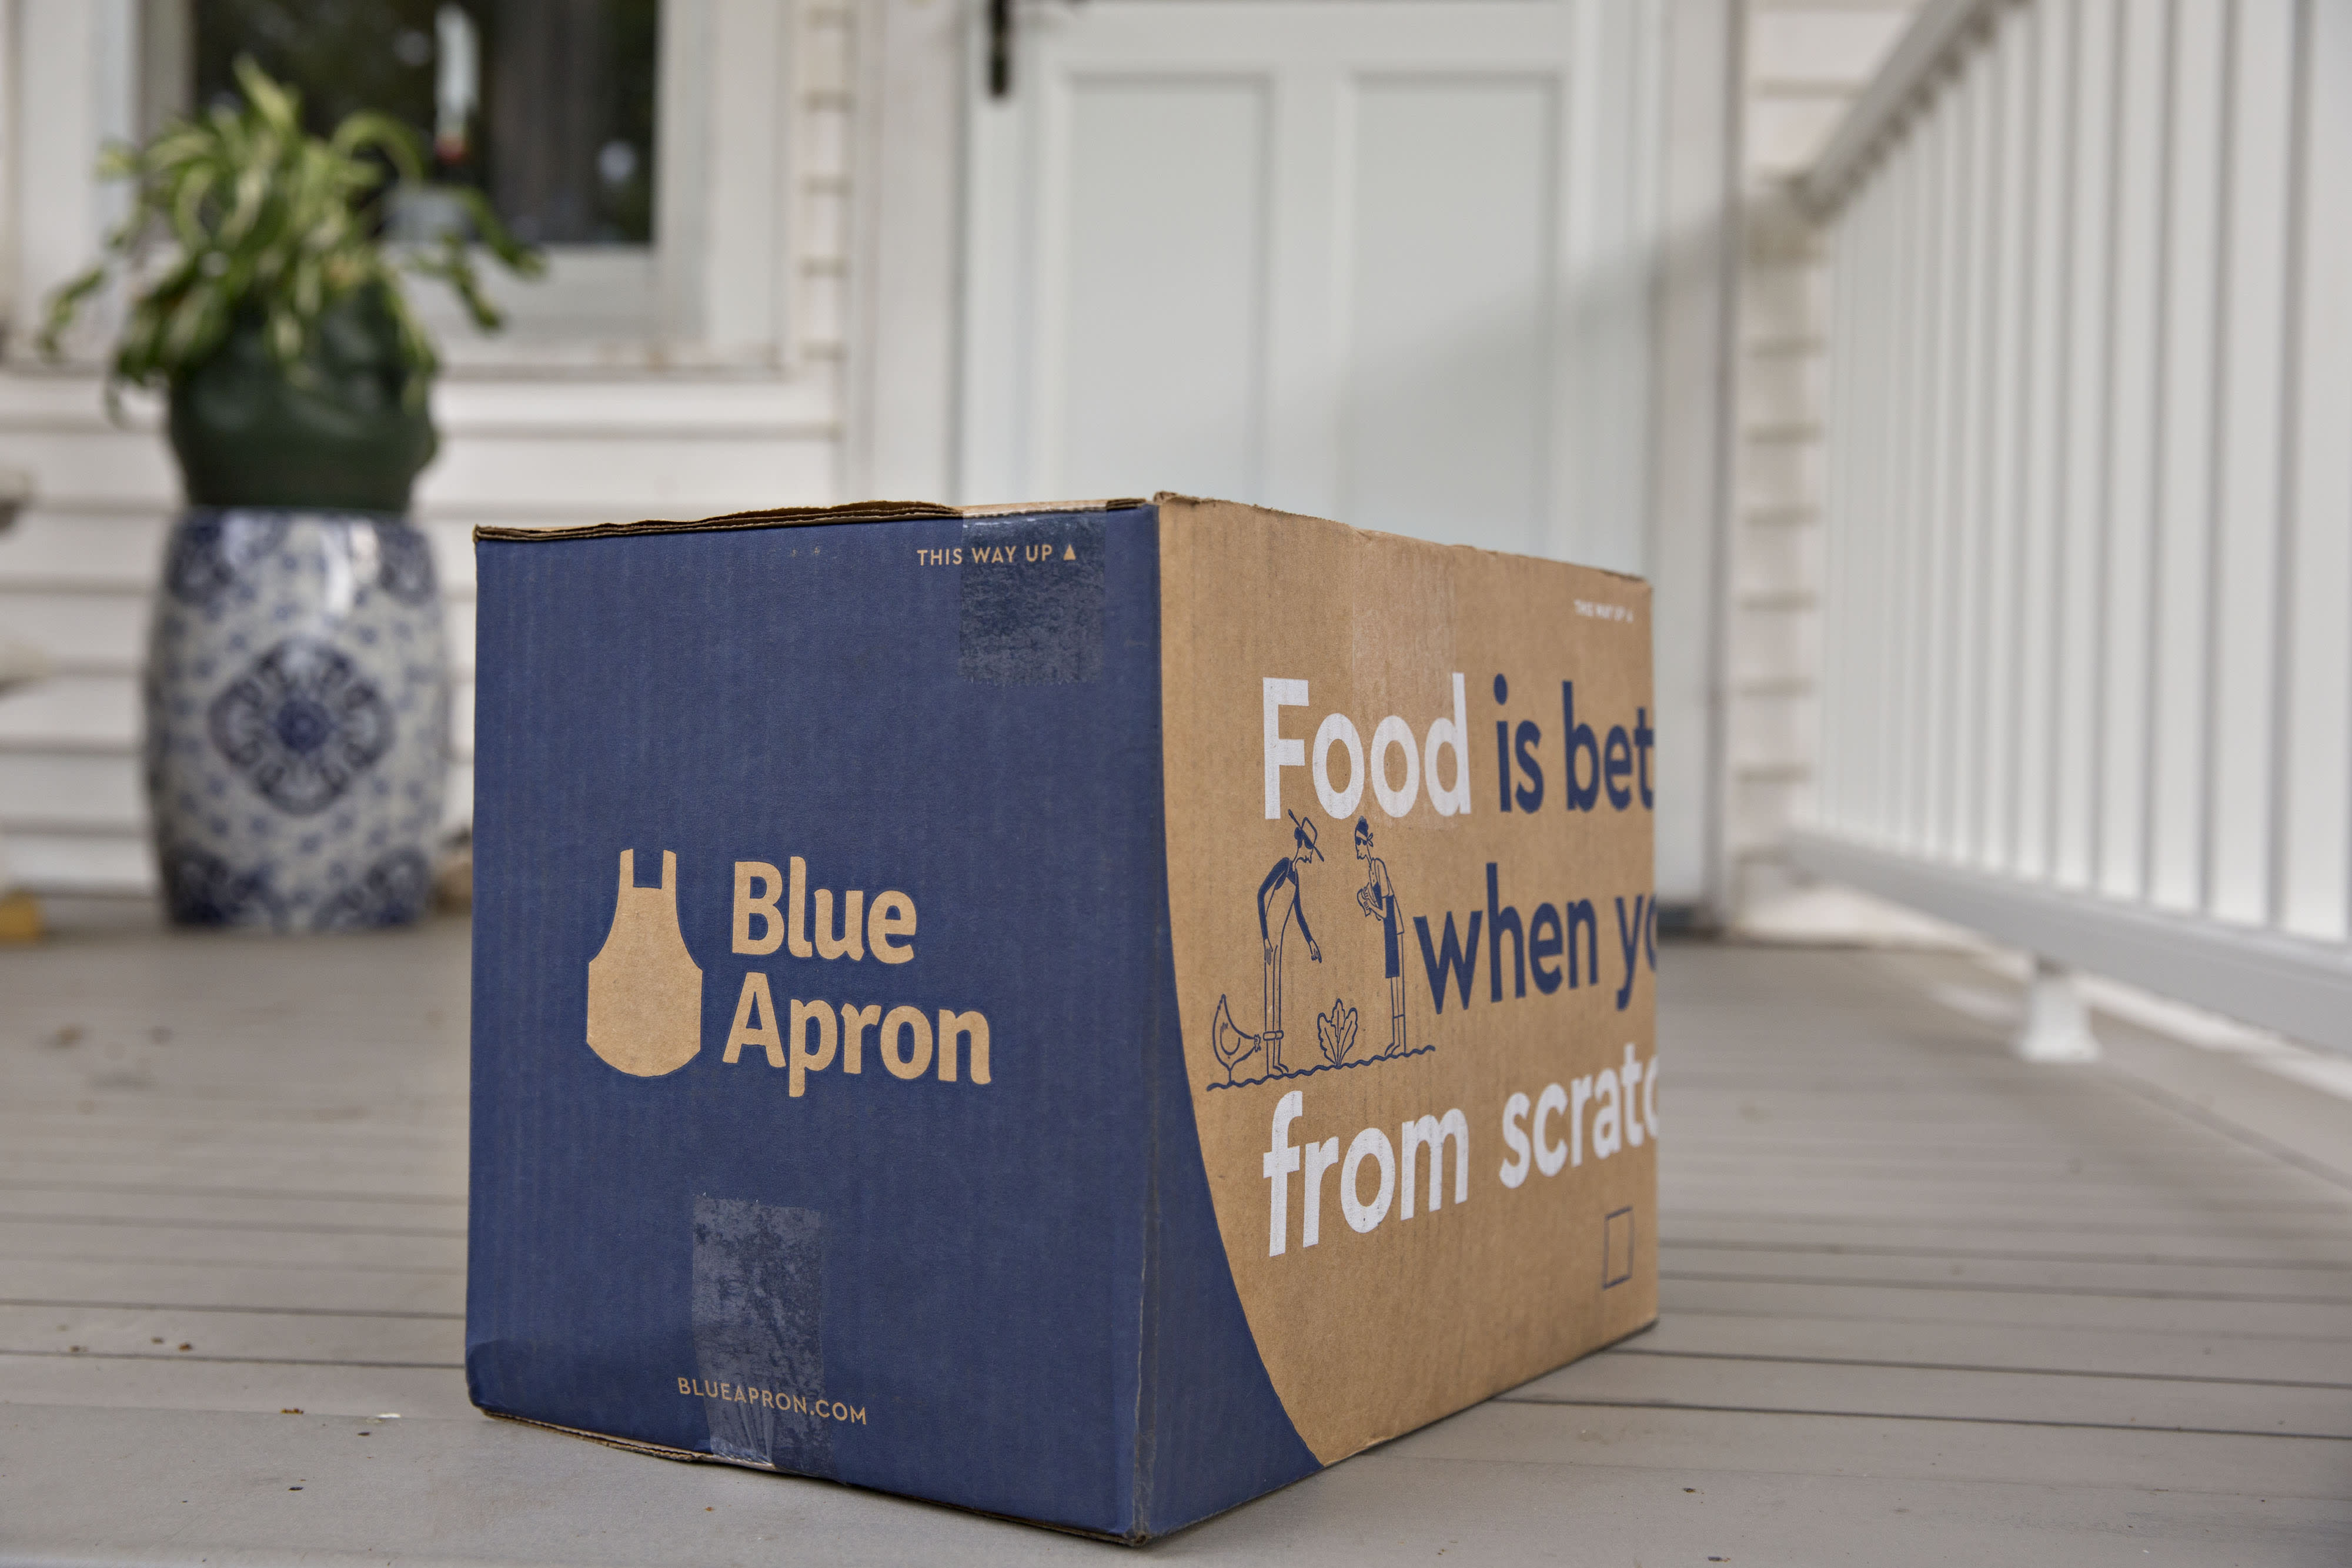 Blue apron and ipo benefits of investing in mutual funds